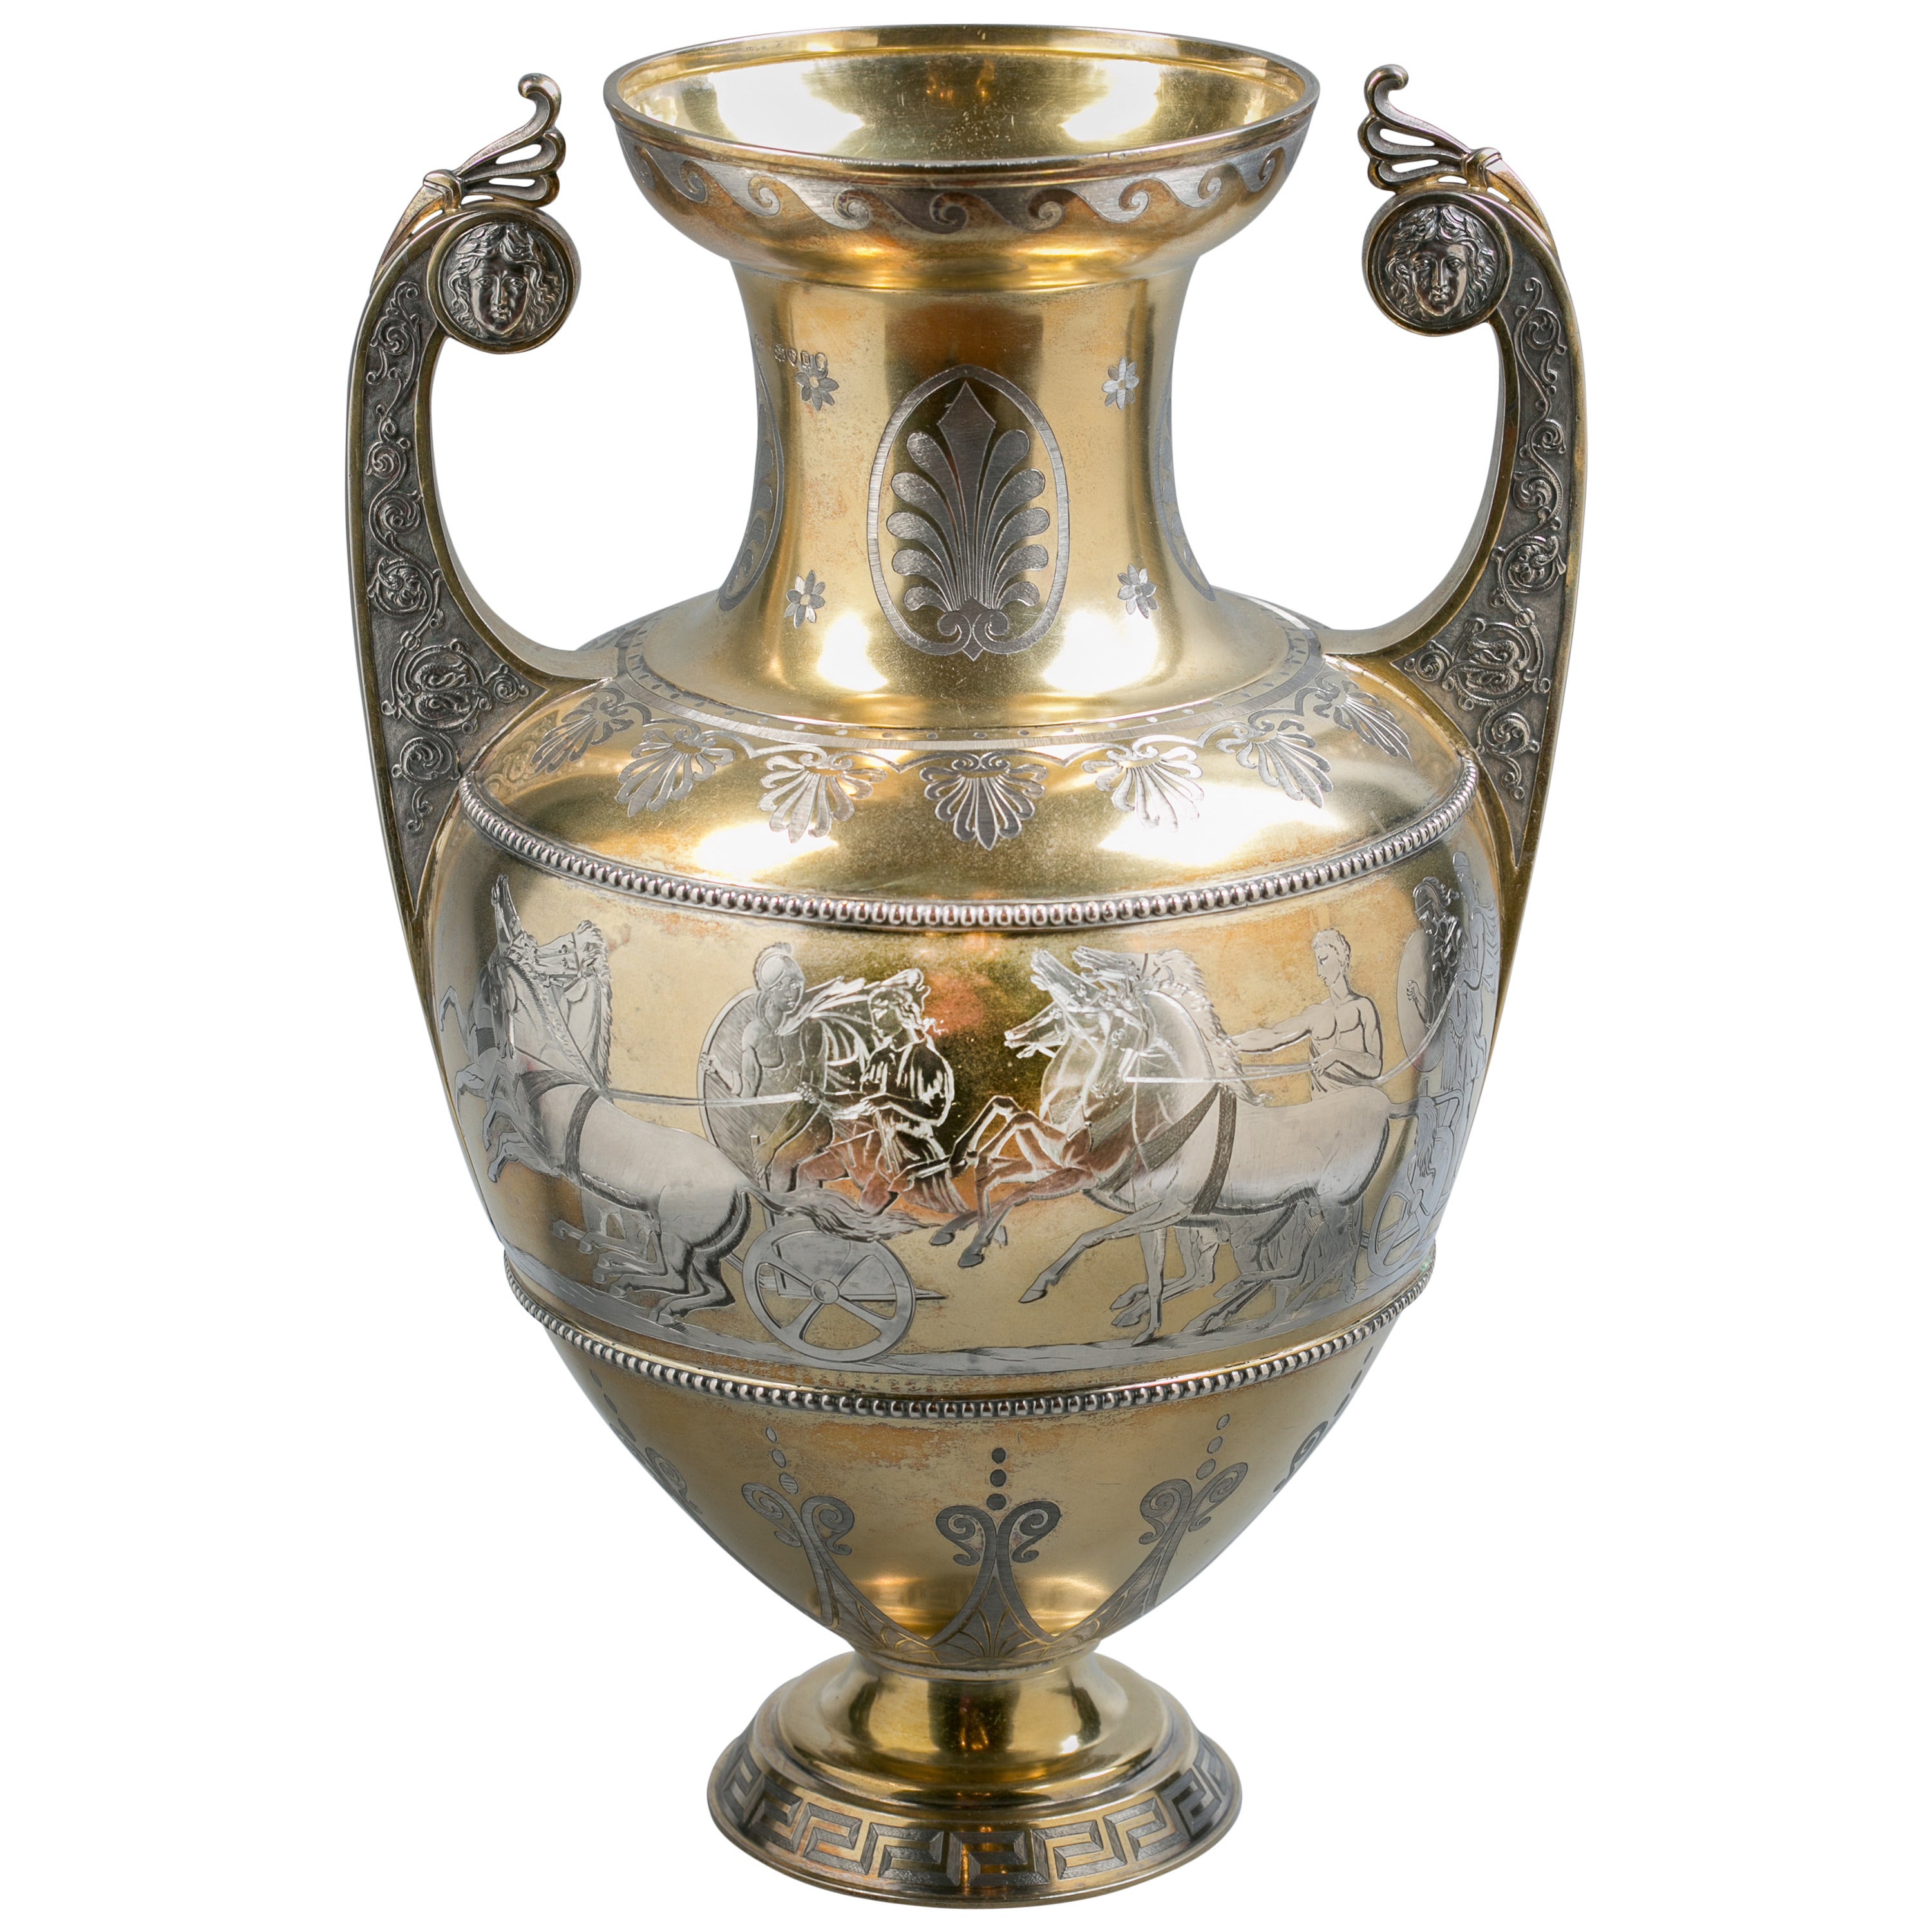 English Silver Gilt and Engraved Amphora-Form Vase For Sale